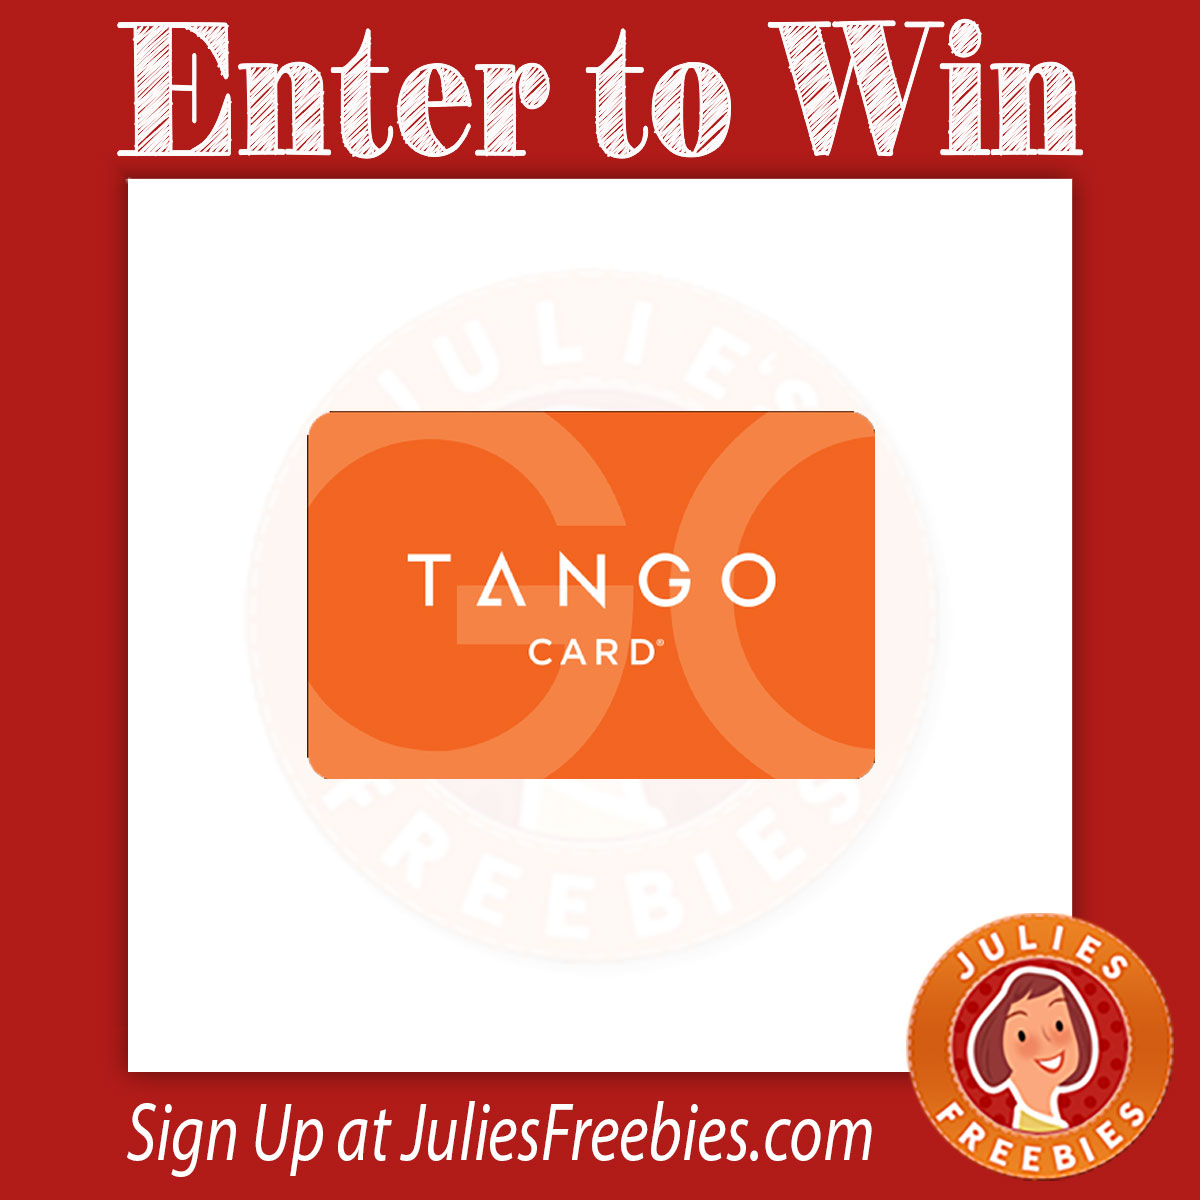 Here Is An Offer Where You Can Enter To Win A Tango Gift Card From Ink 4 Less